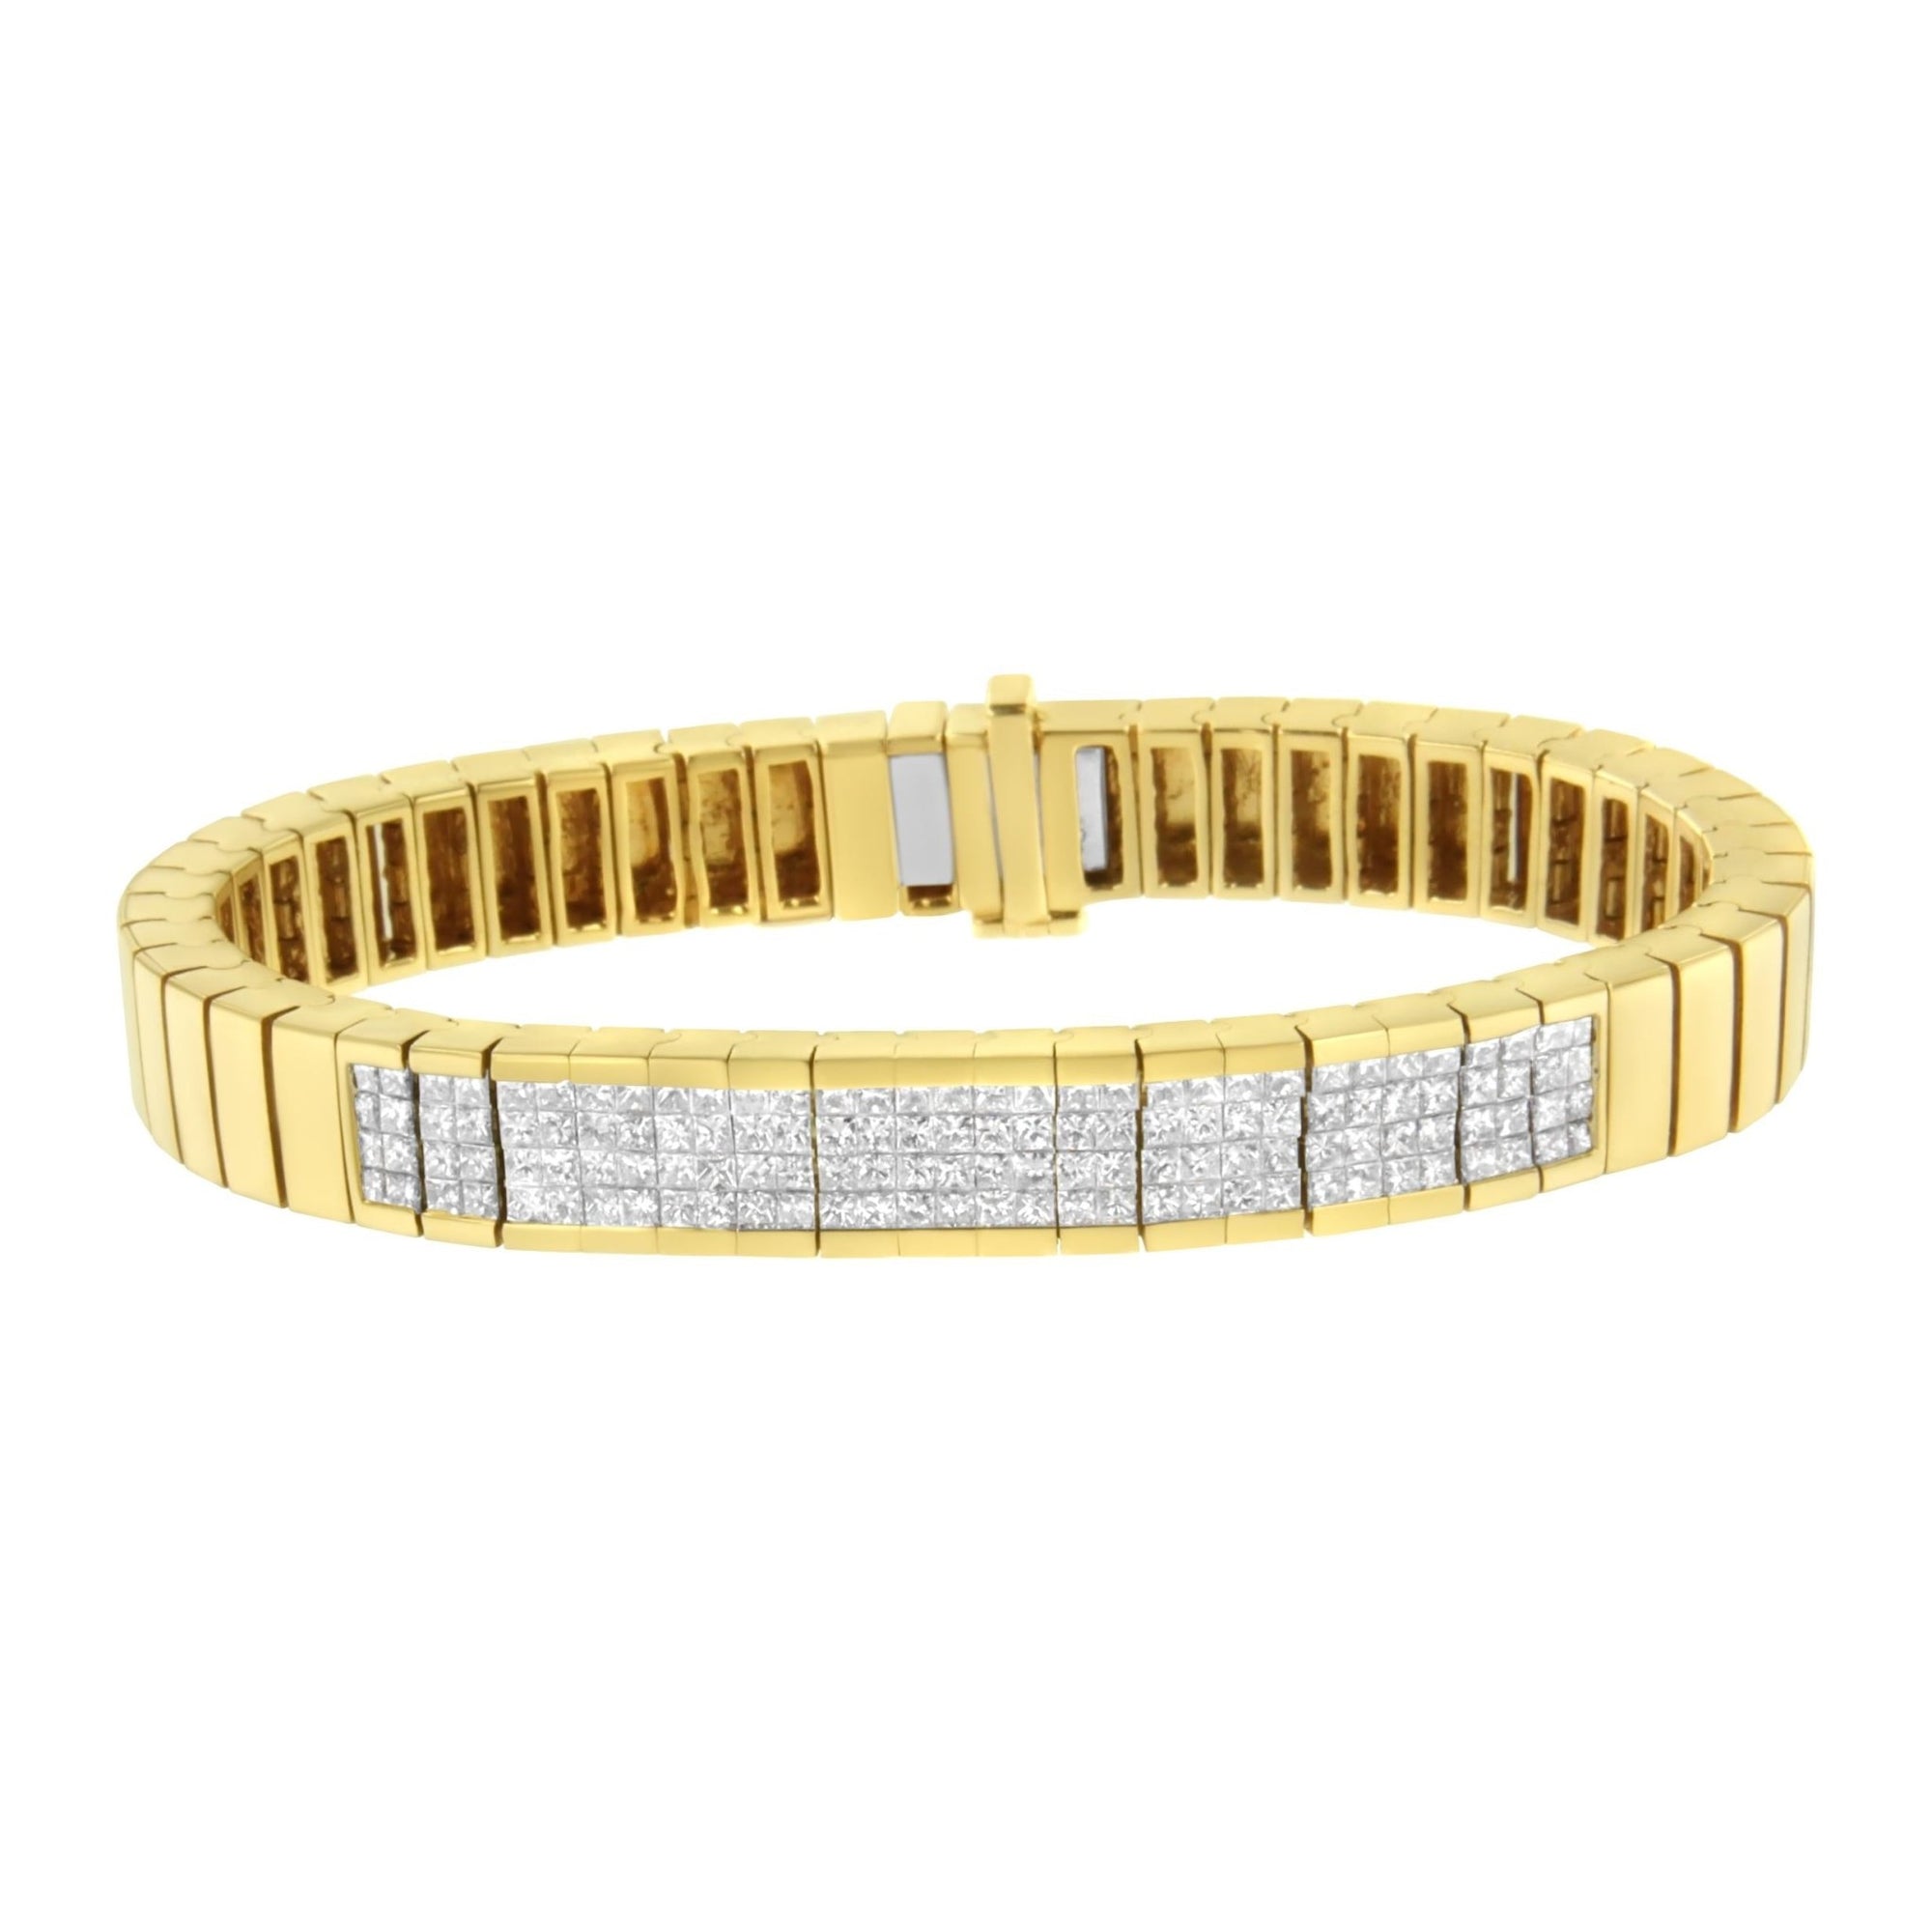 14K Yellow Gold 3 5/8 cttw Invisible Set Princess-Cut Diamond ID Tennis Bracelet (I-J Color, SI1-SI2 Clarity) - Size 7" - LinkagejewelrydesignLinkagejewelrydesign